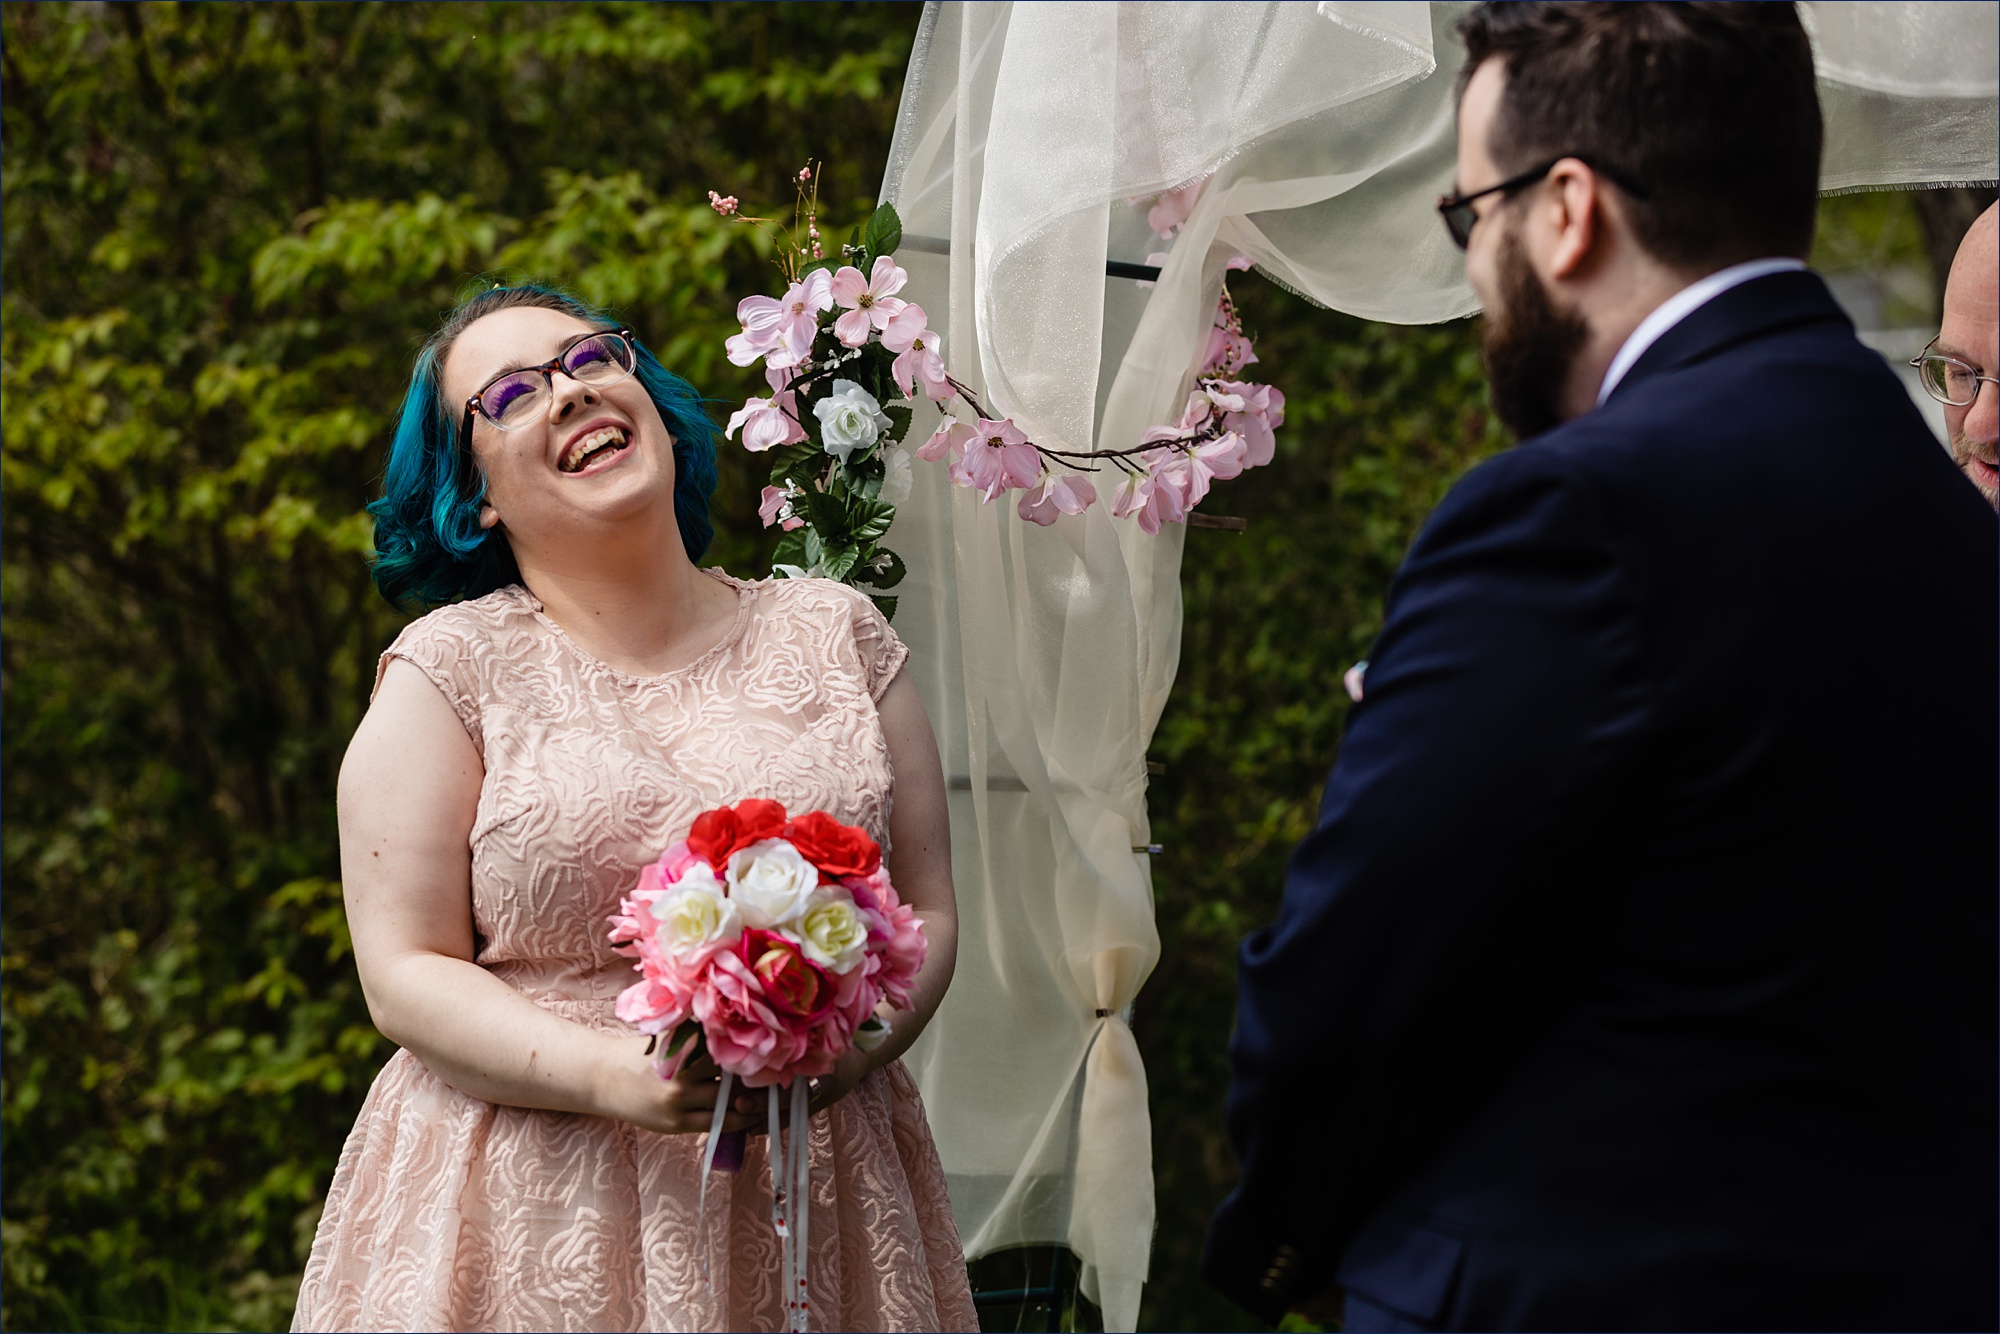 The bride laughs during their outdoor intimate Maine wedding in the backyard